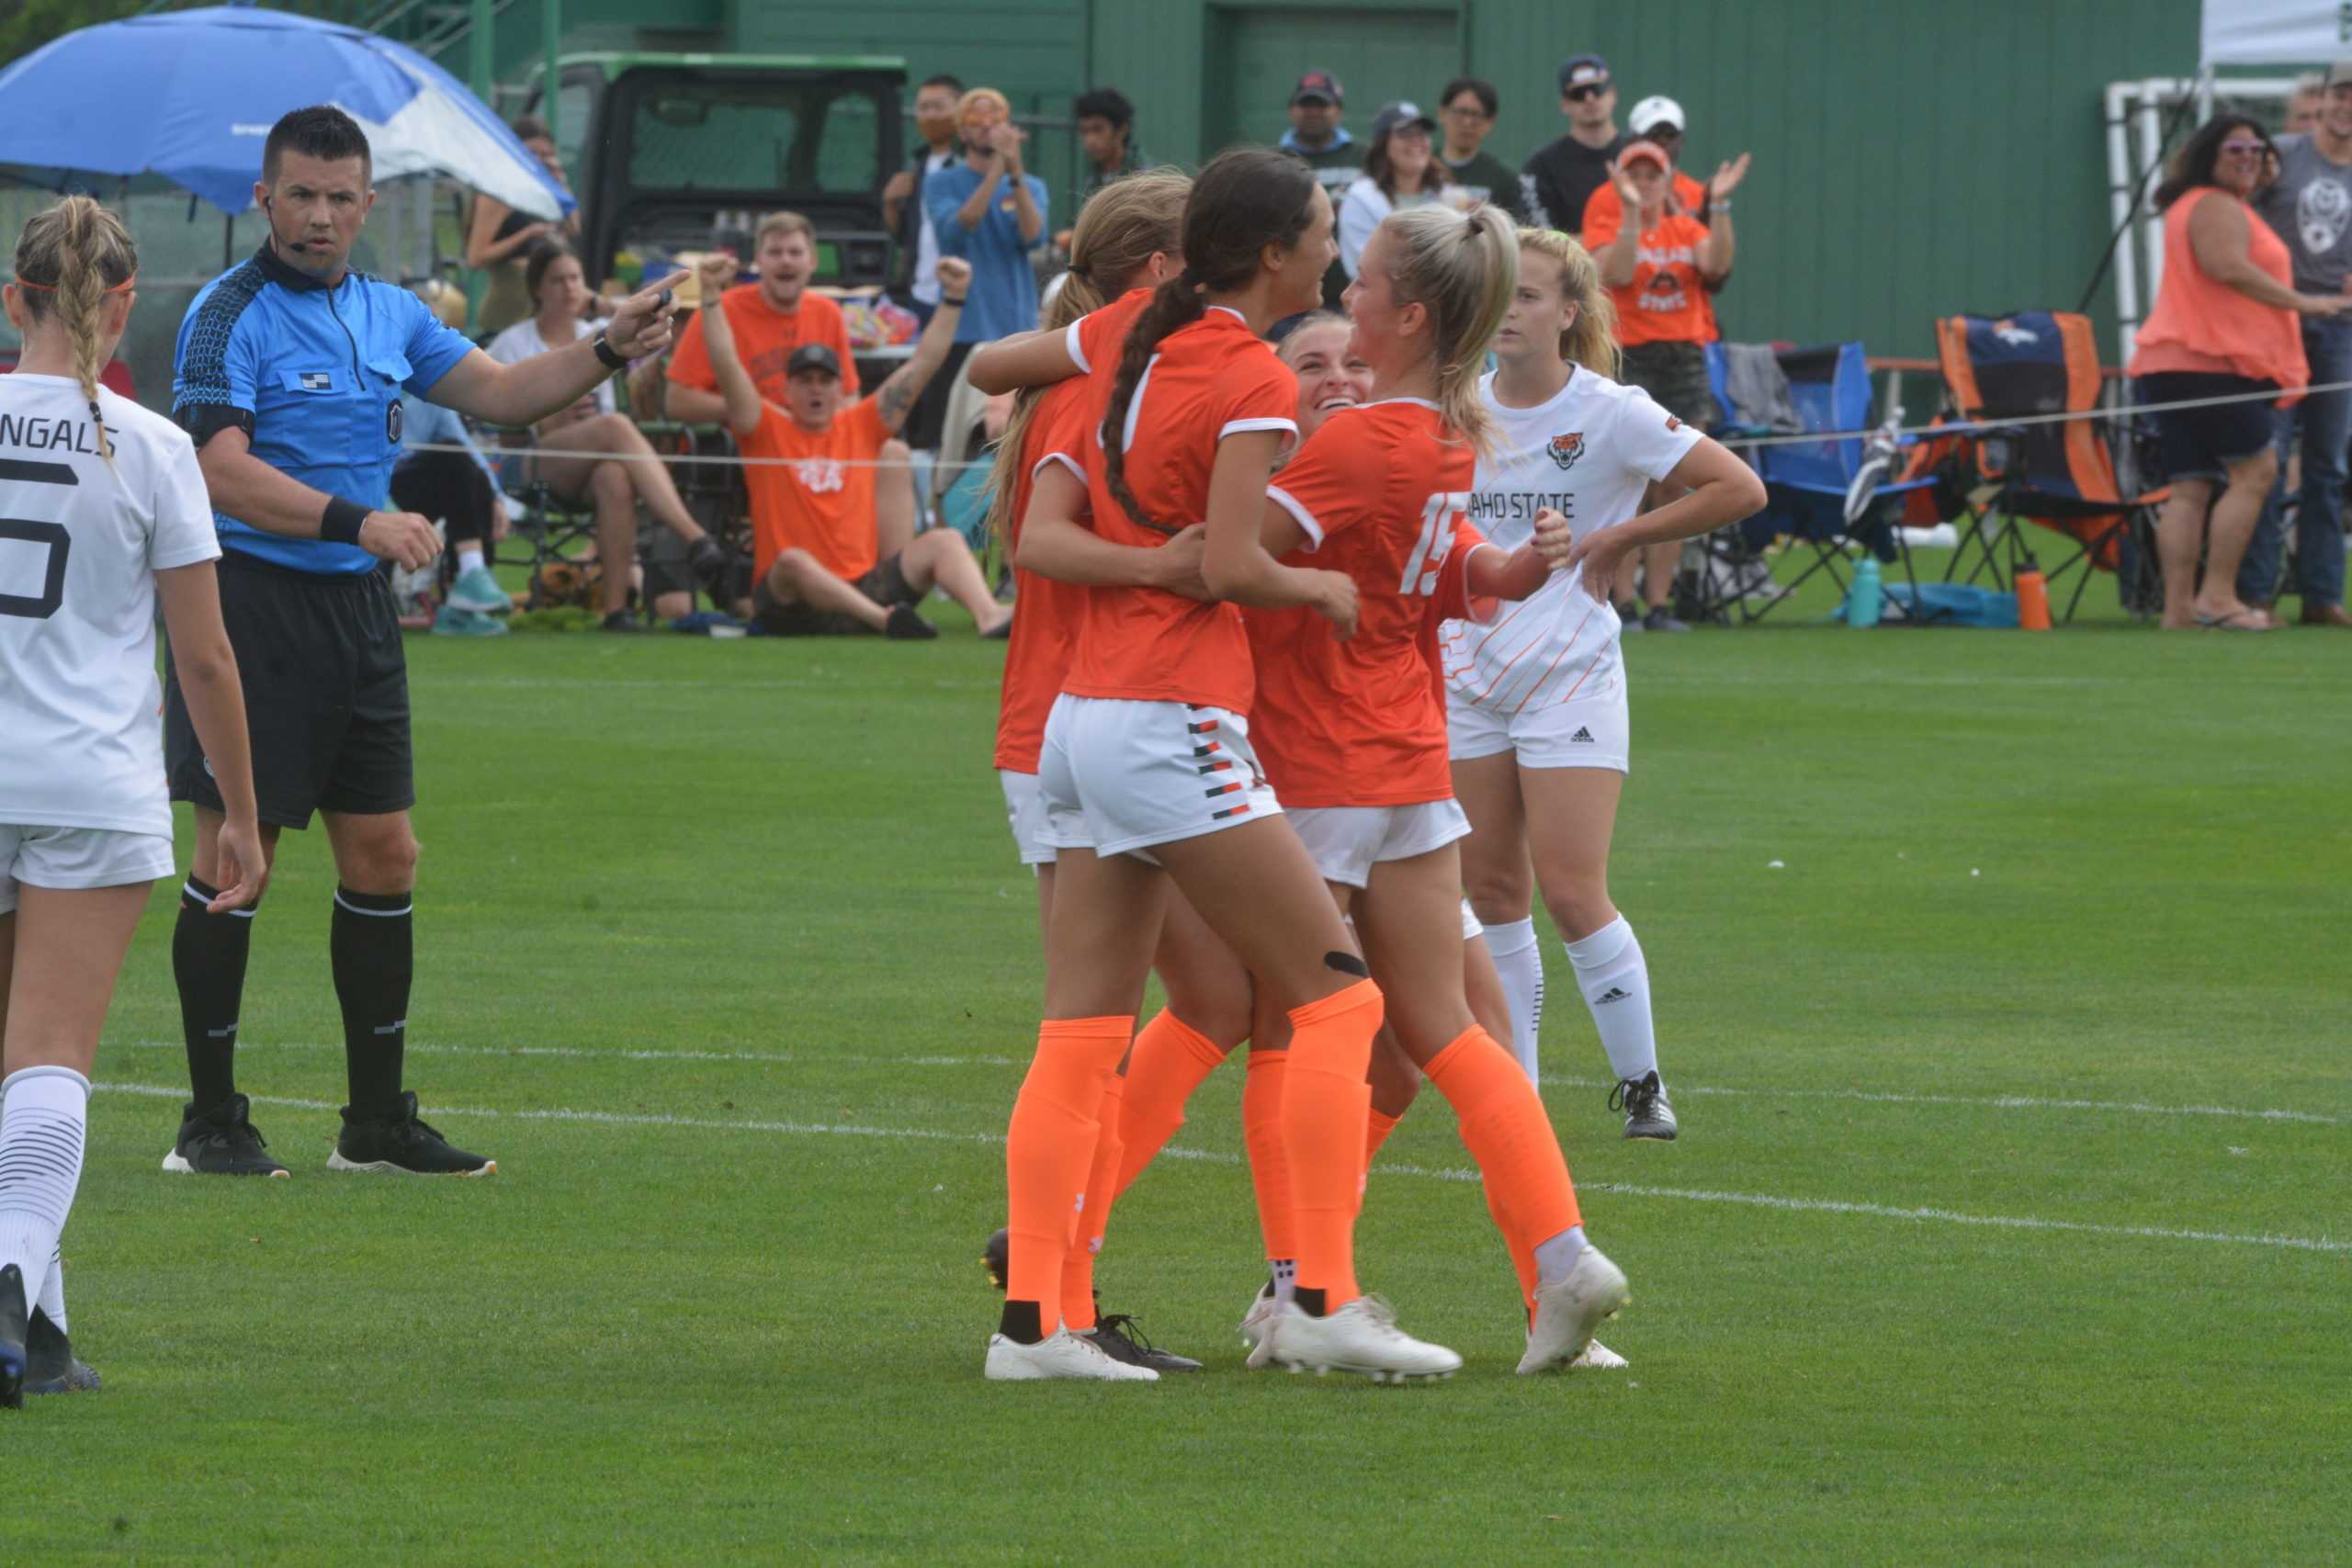 Members of the Colorado State women's soccer team huddle together for a celebration